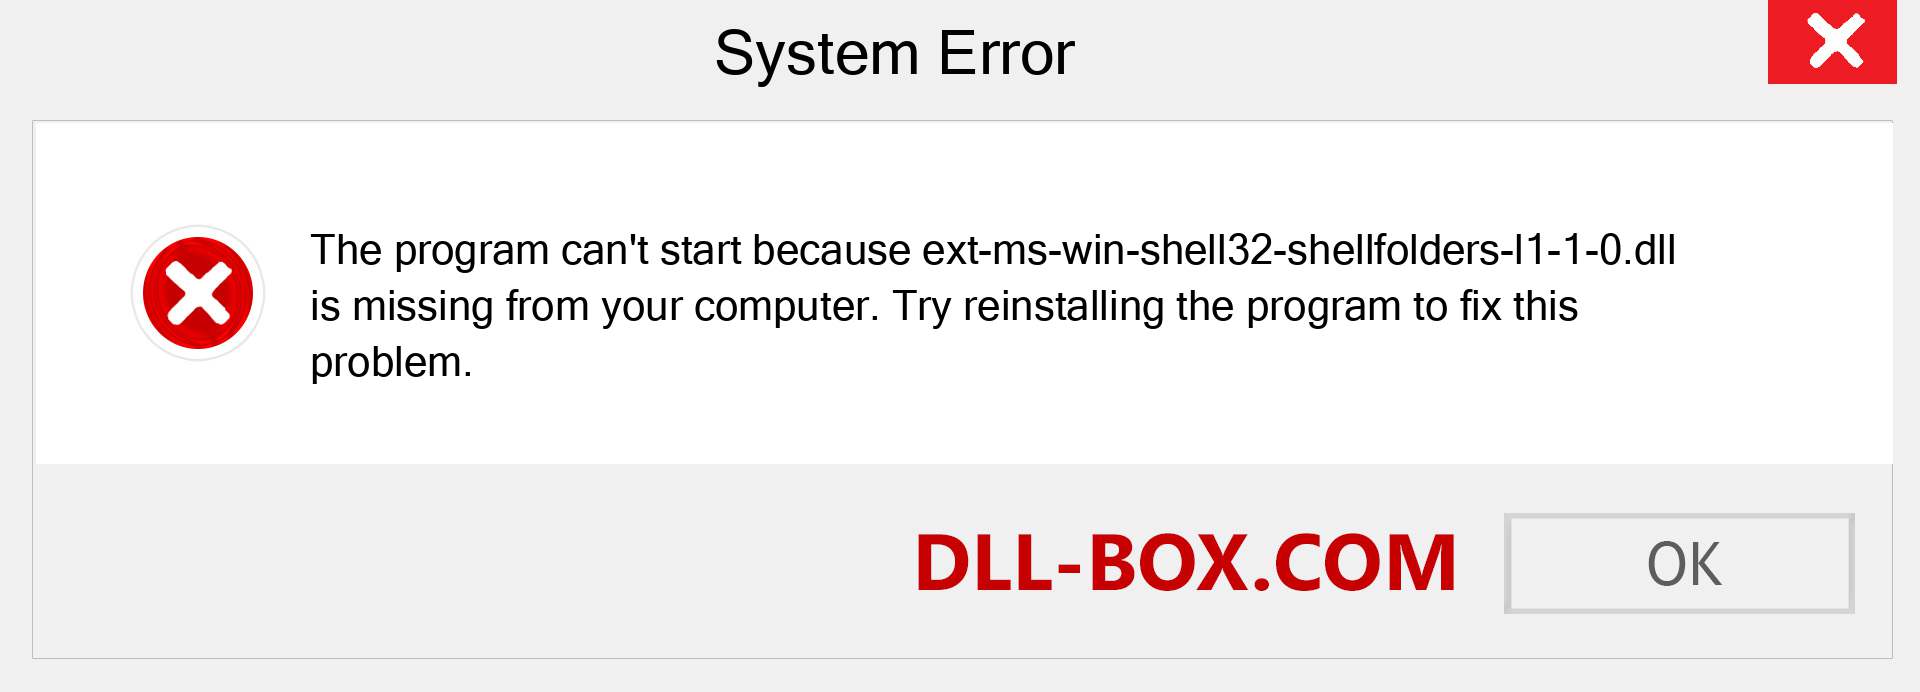  ext-ms-win-shell32-shellfolders-l1-1-0.dll file is missing?. Download for Windows 7, 8, 10 - Fix  ext-ms-win-shell32-shellfolders-l1-1-0 dll Missing Error on Windows, photos, images